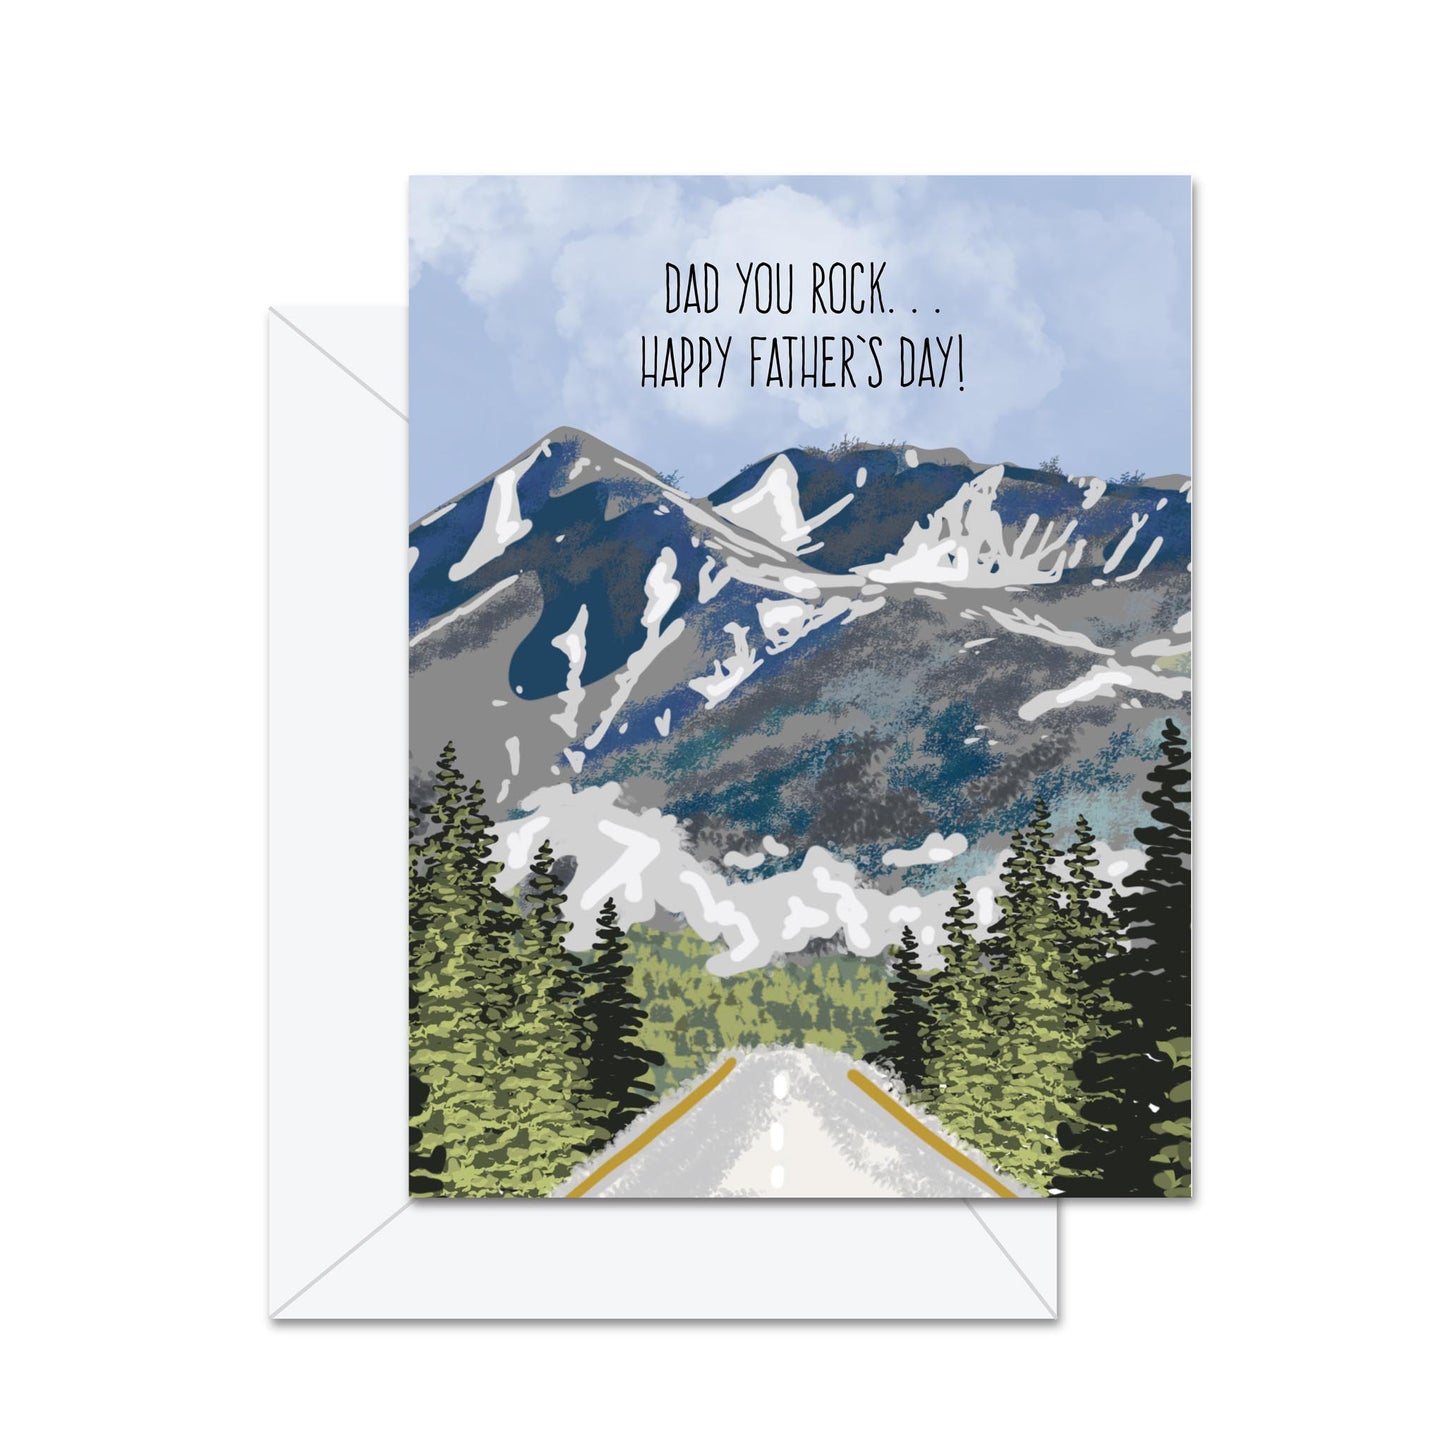 Dad You Rock . . . Happy Father's Day! - Greeting Card